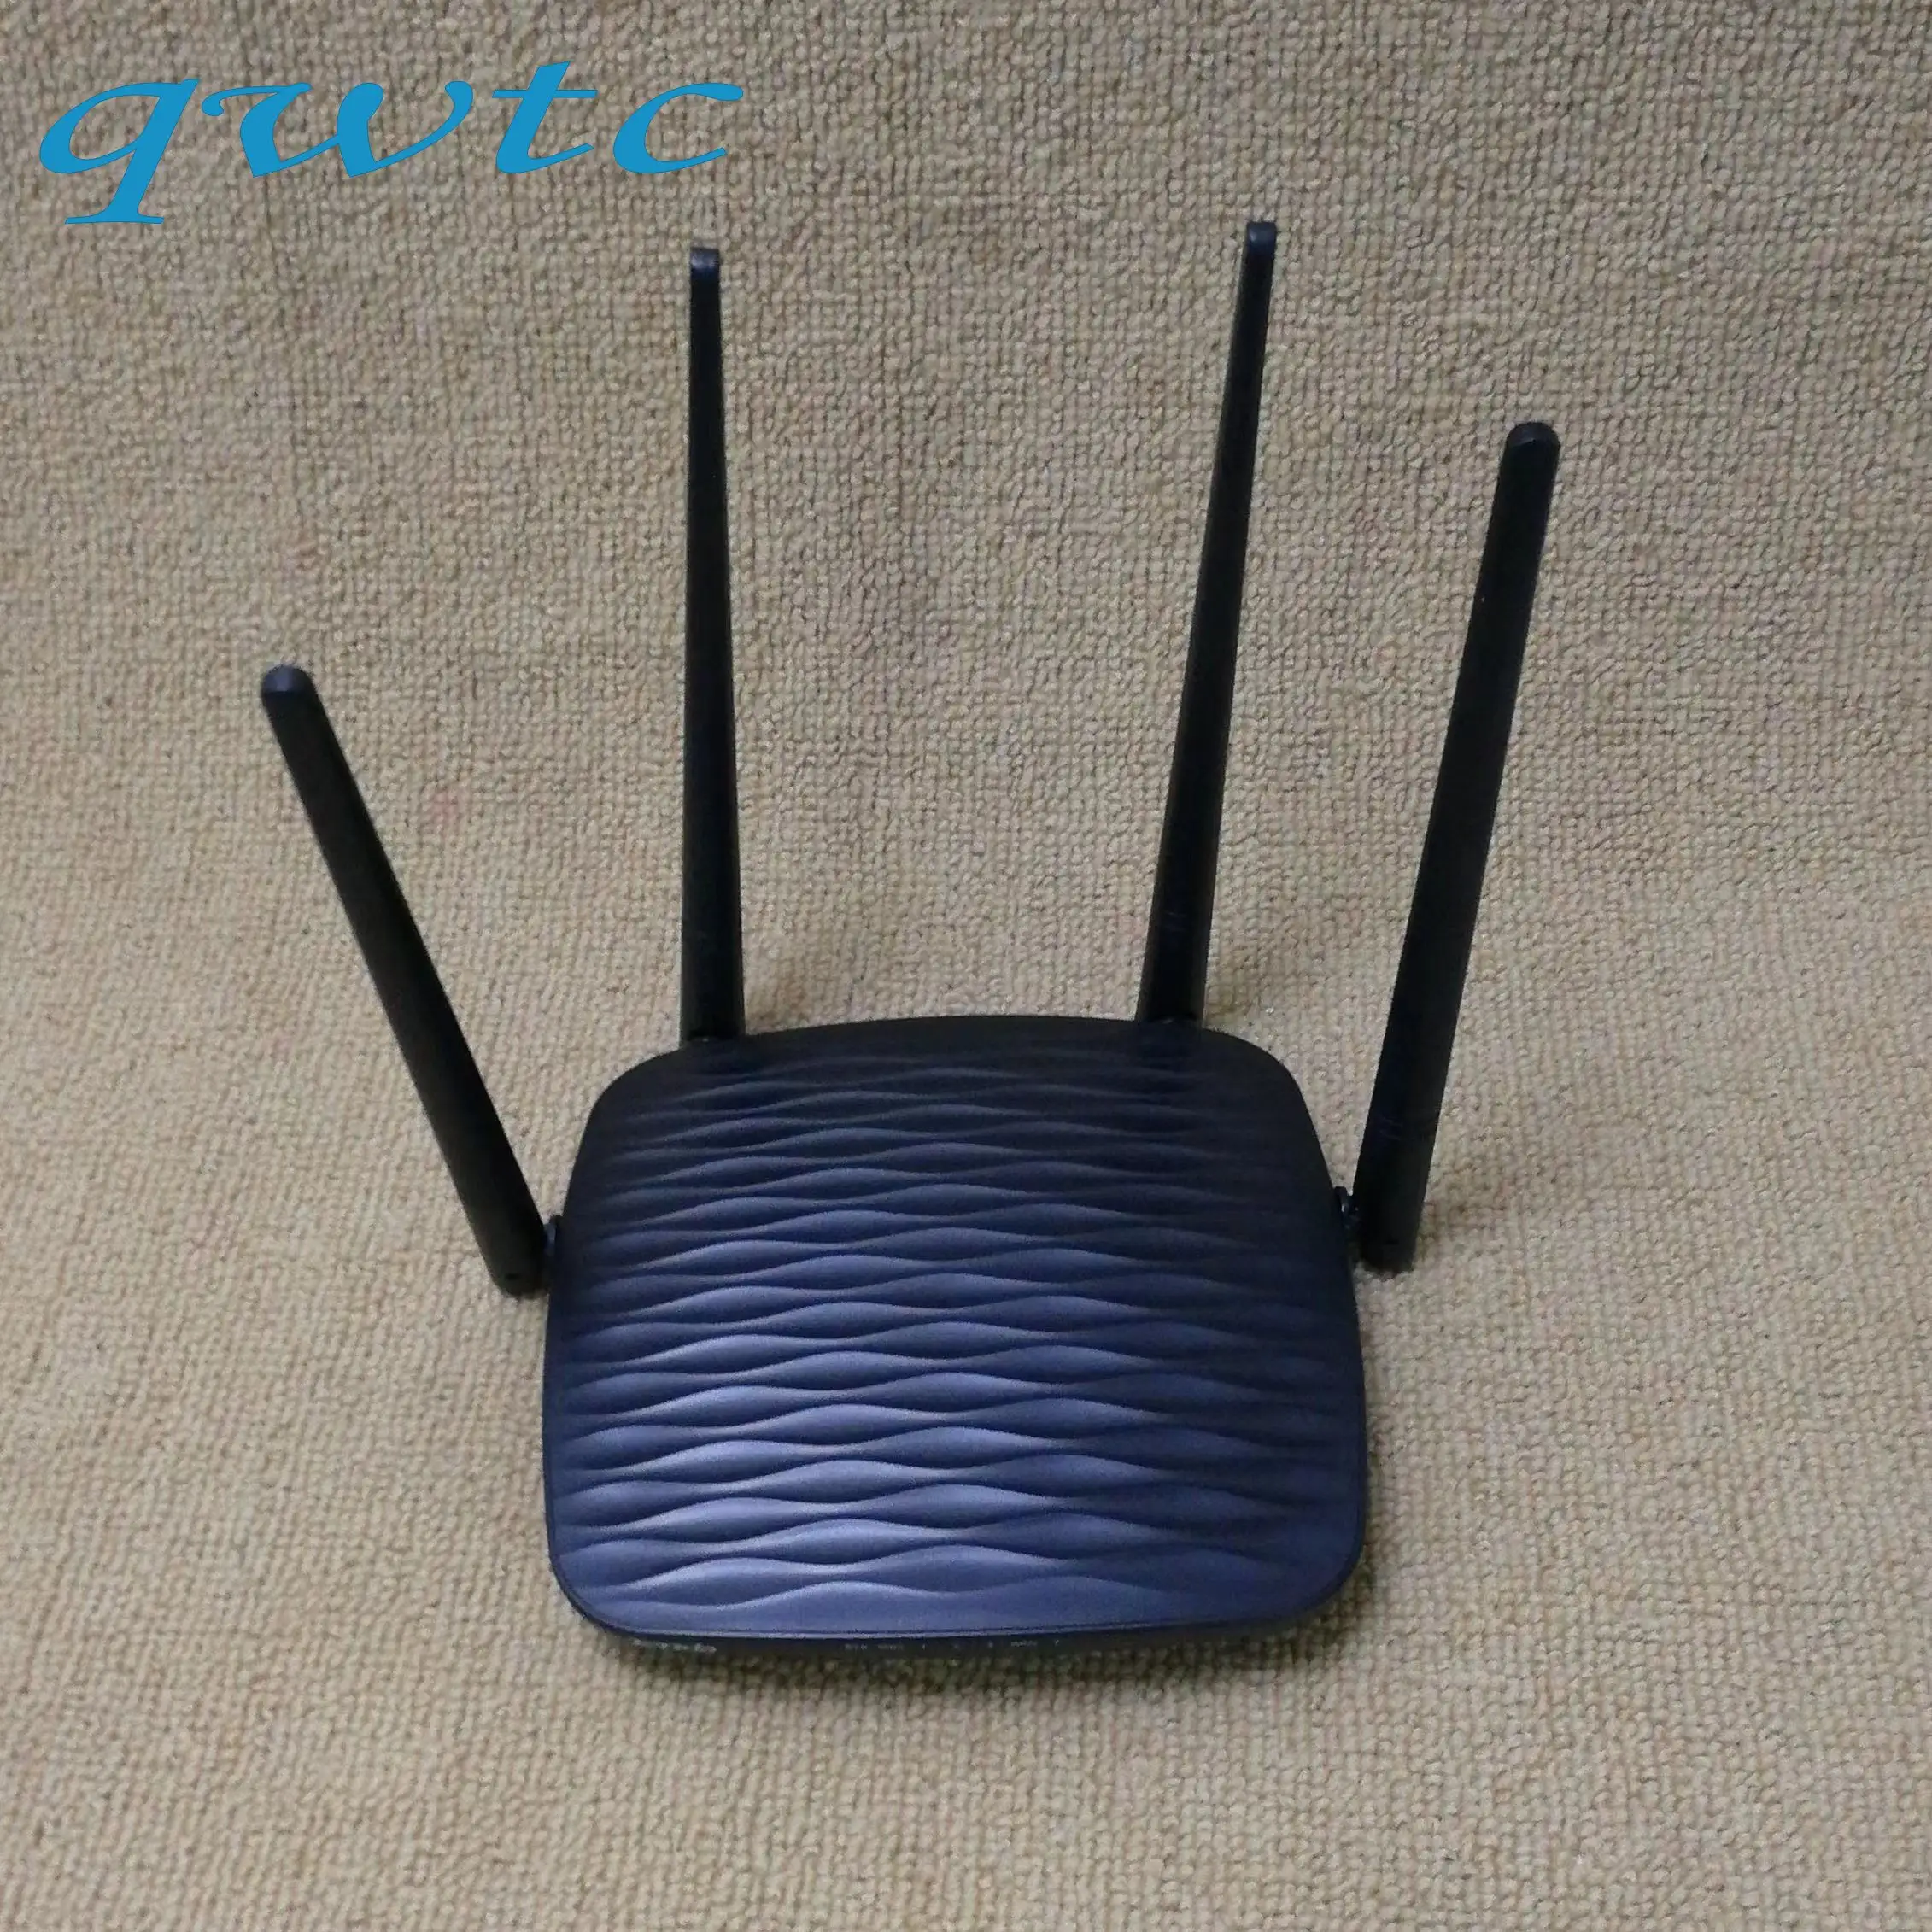 Tenda AC5 1200MBPS Dual-Band Router Dual-Band (2.4 GHz / 5 GHz) Fast Ethernet Black Repeater Wireless Router